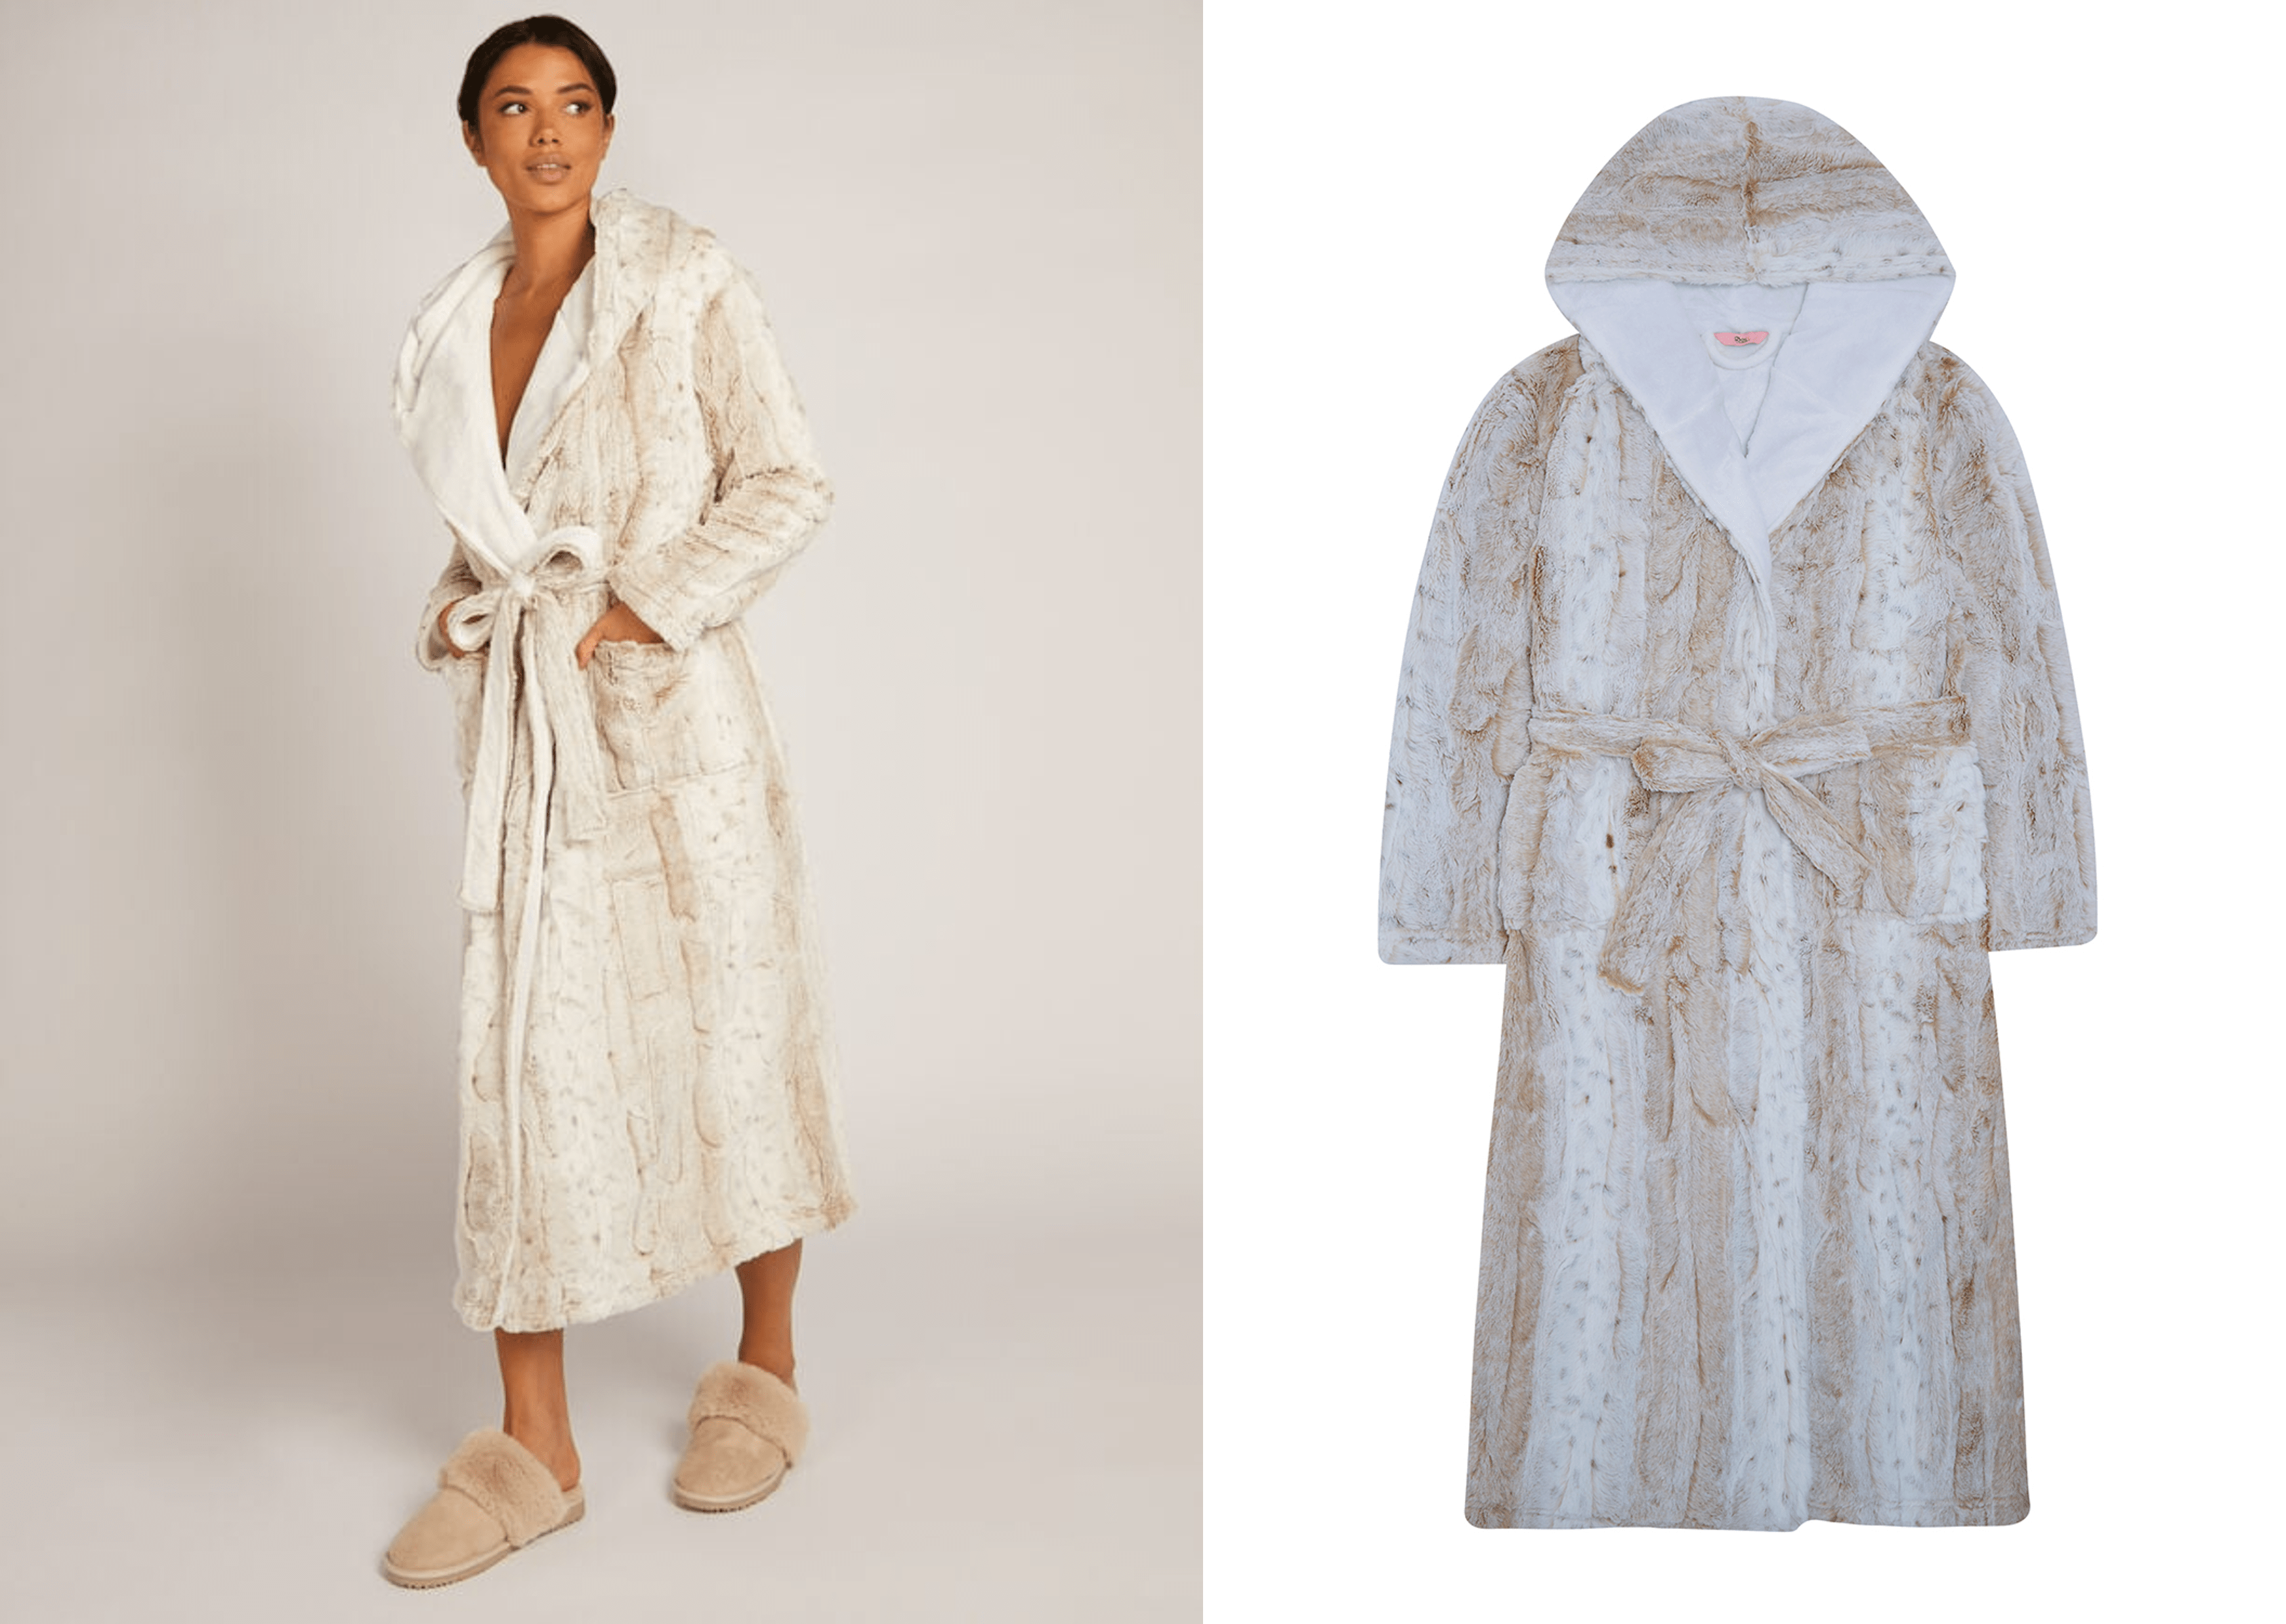 Robes & Dressing Gowns | Bathrobes | PrettyLittleThing